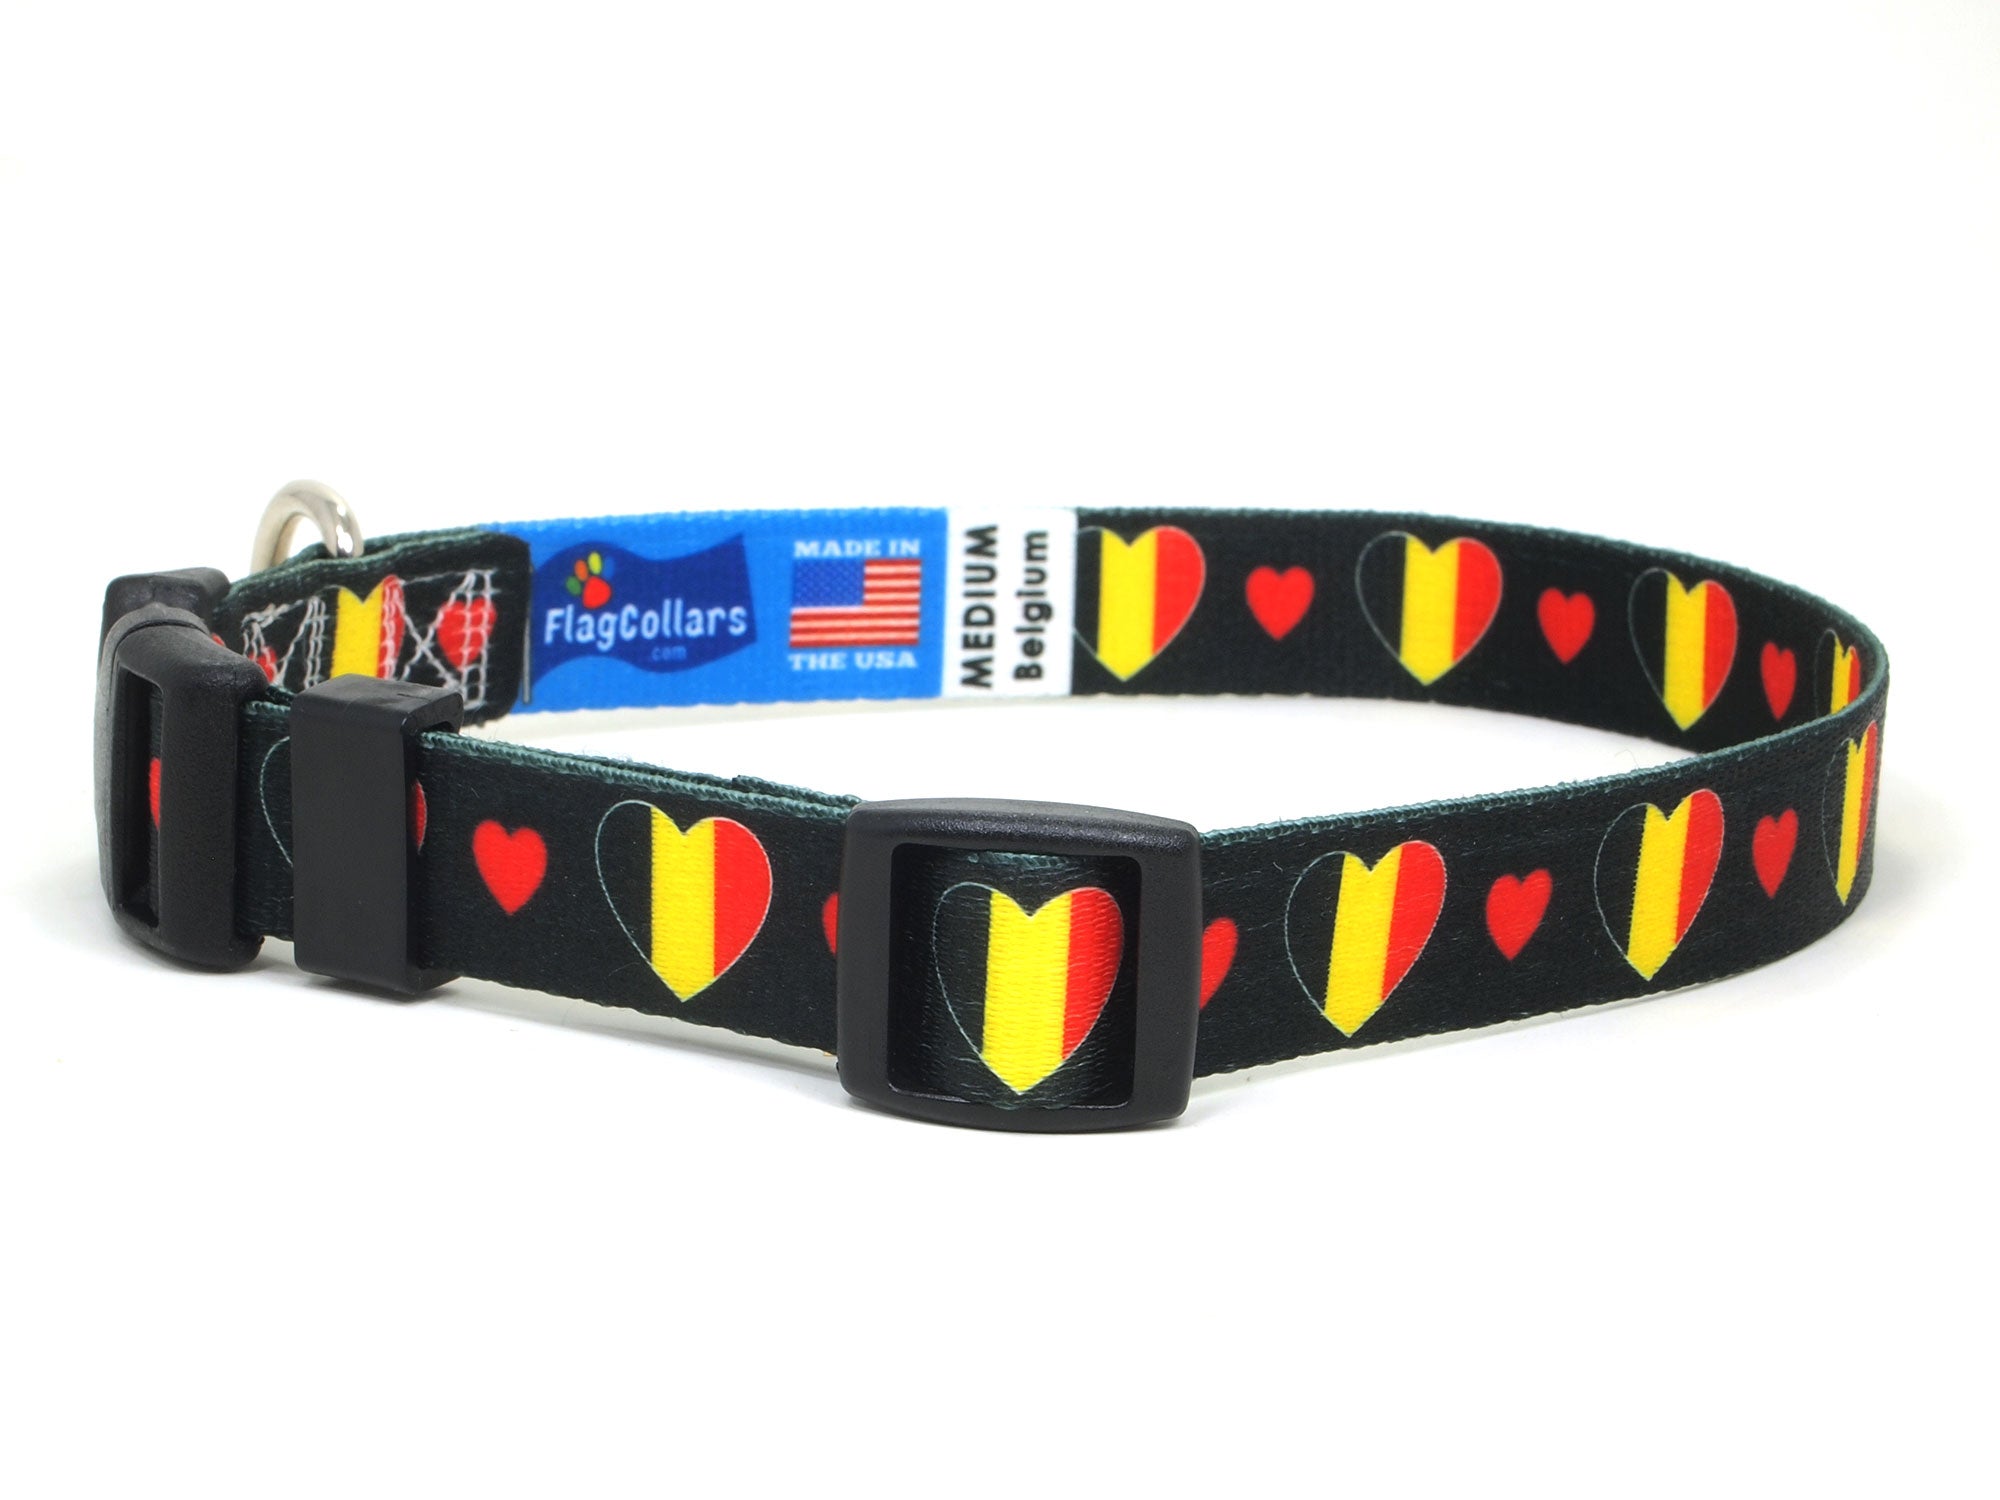 Dog Collar with Belgium Hearts Pattern in black